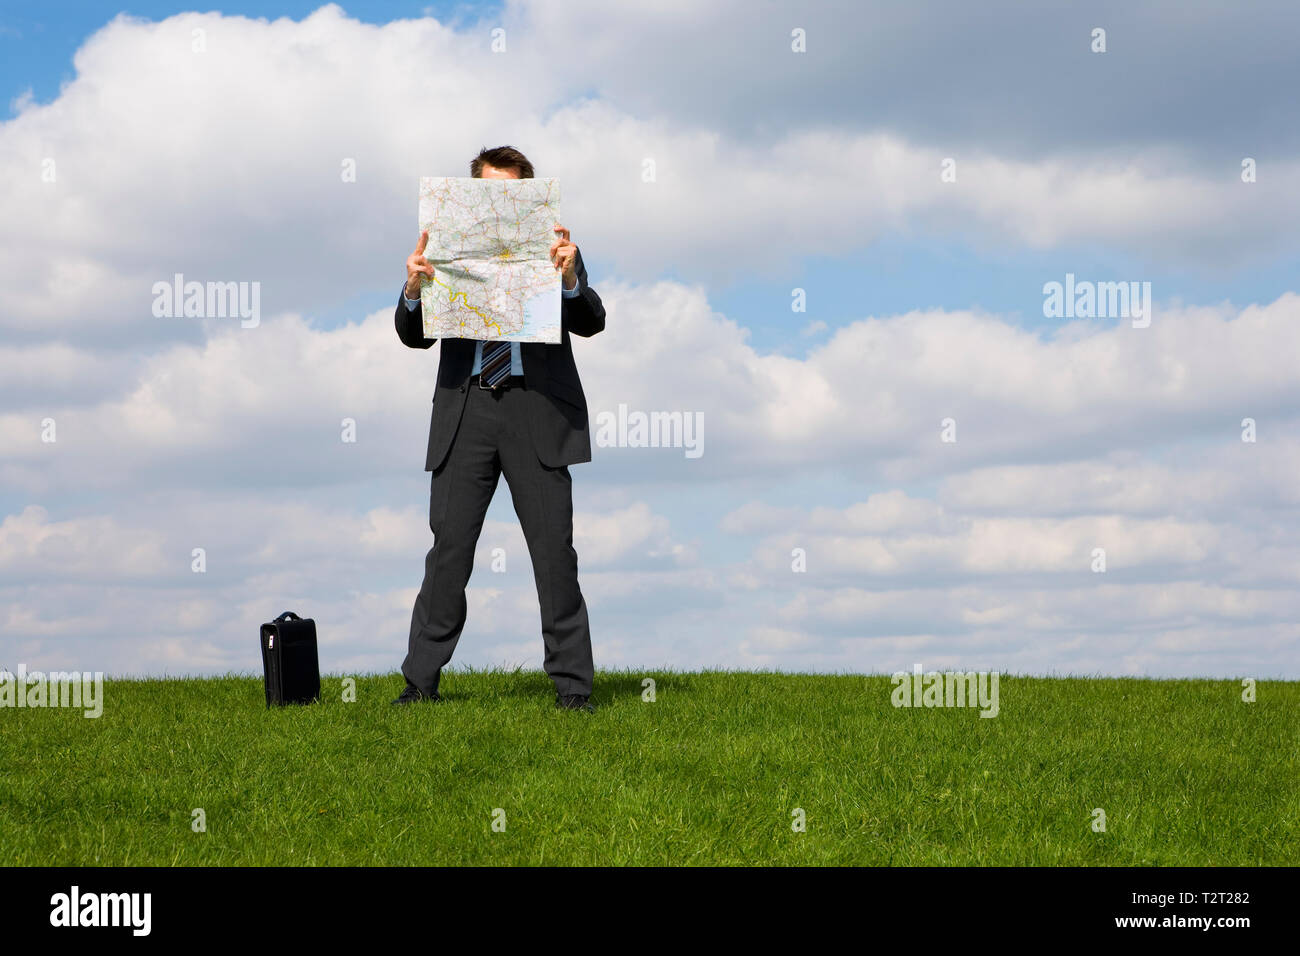 Caucasian businessman reading a map in a field Stock Photo